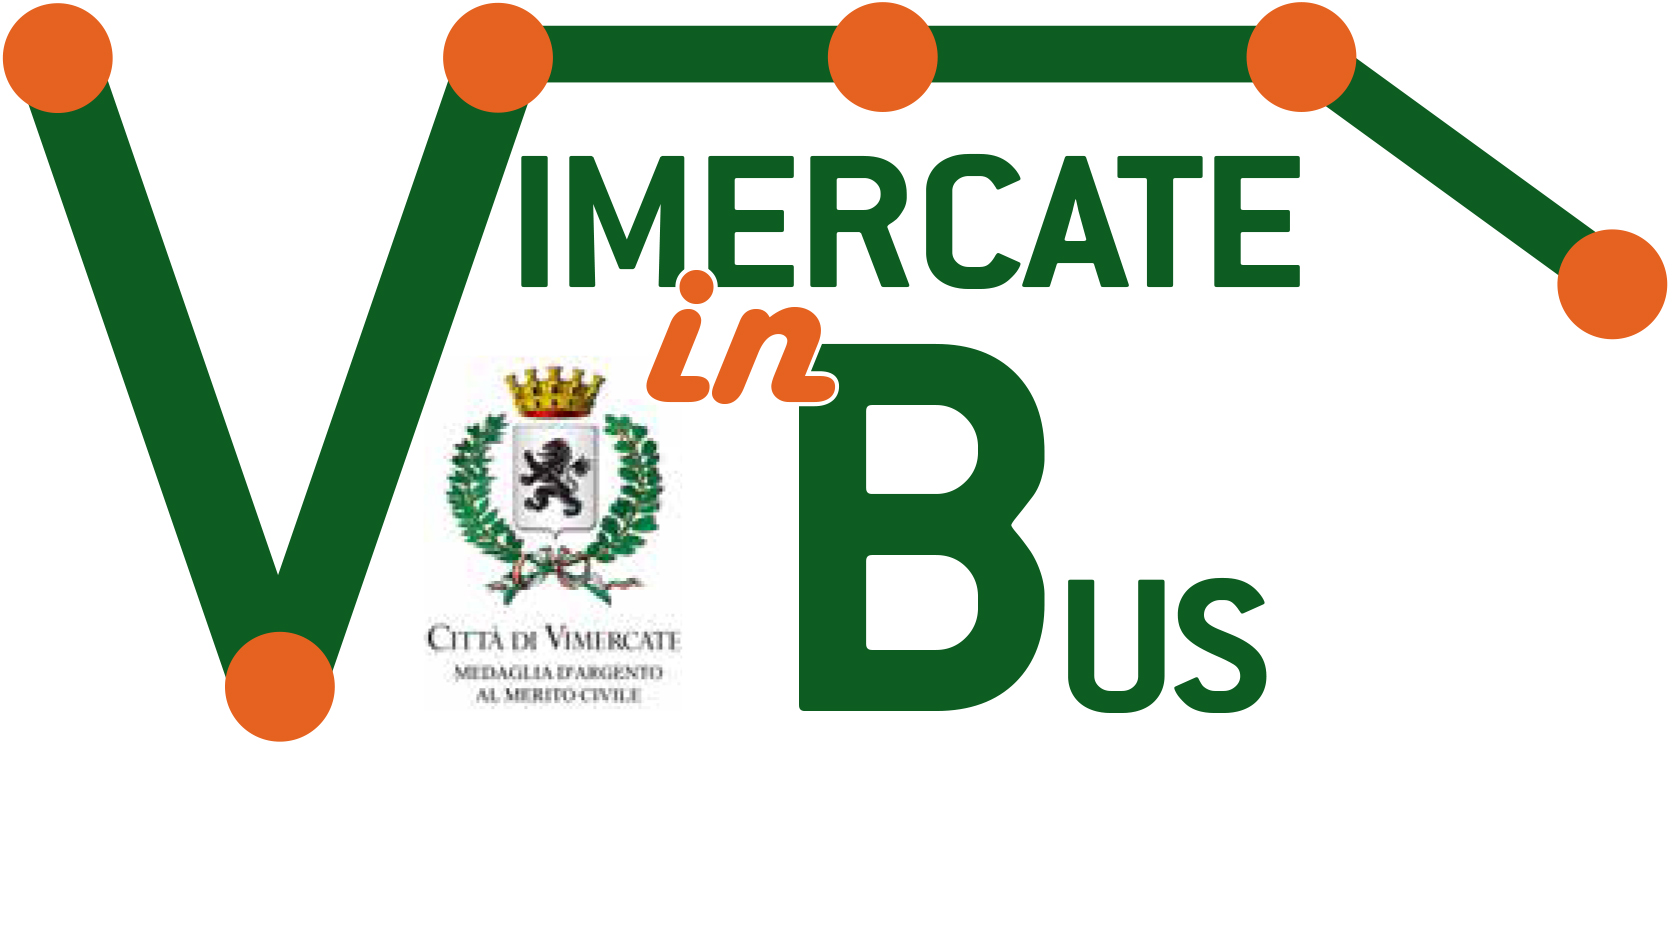 vimercate in bus